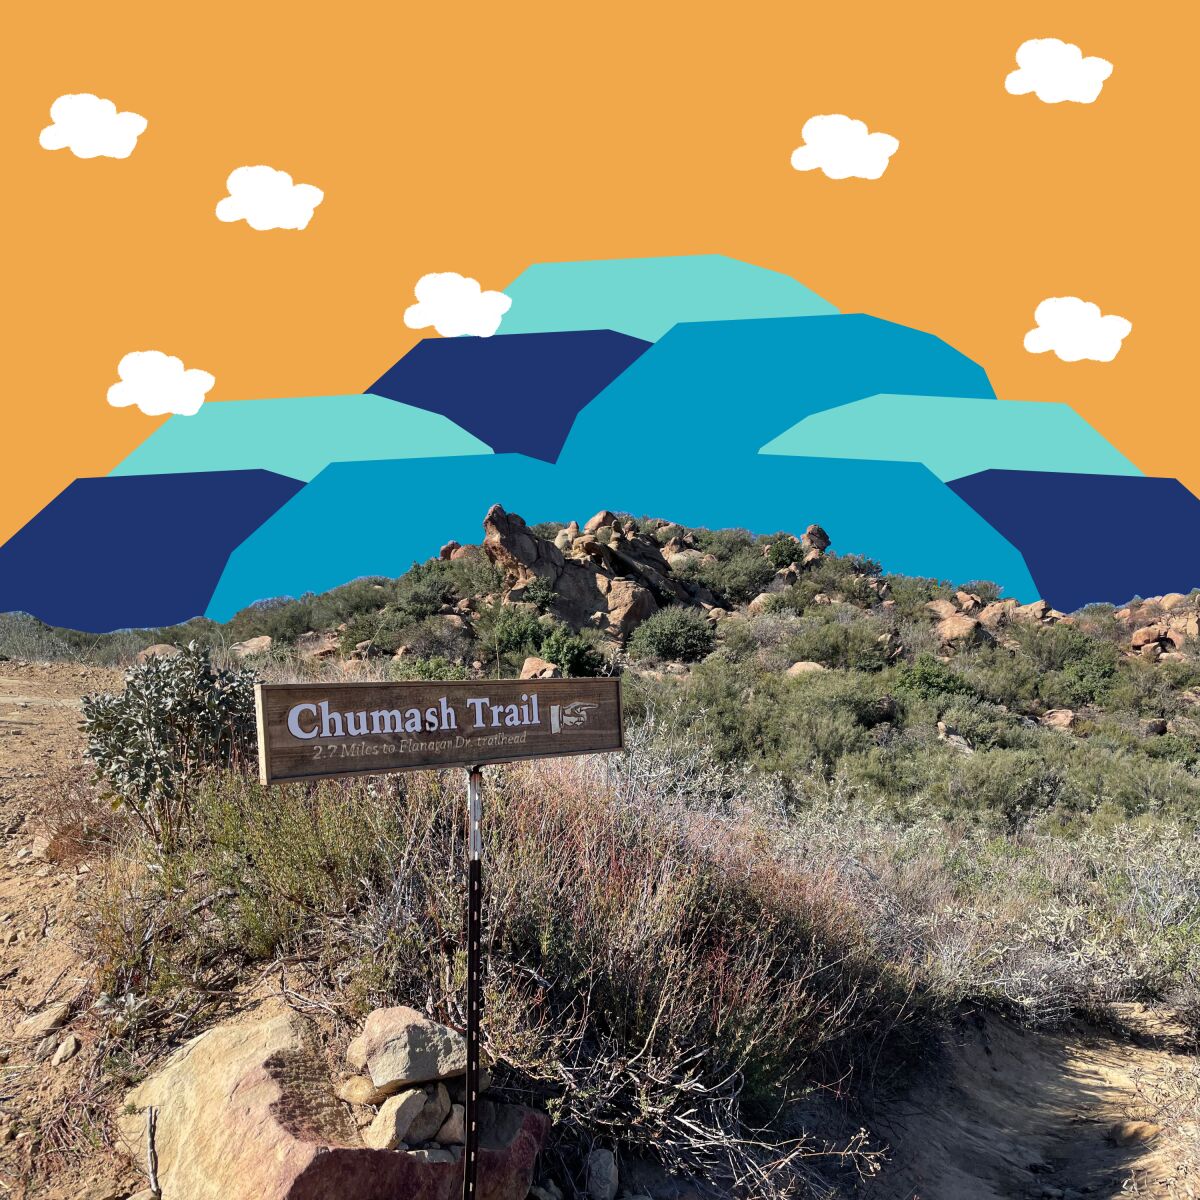 An illustration of clouds and mountains with a photo of the Chumash Trail